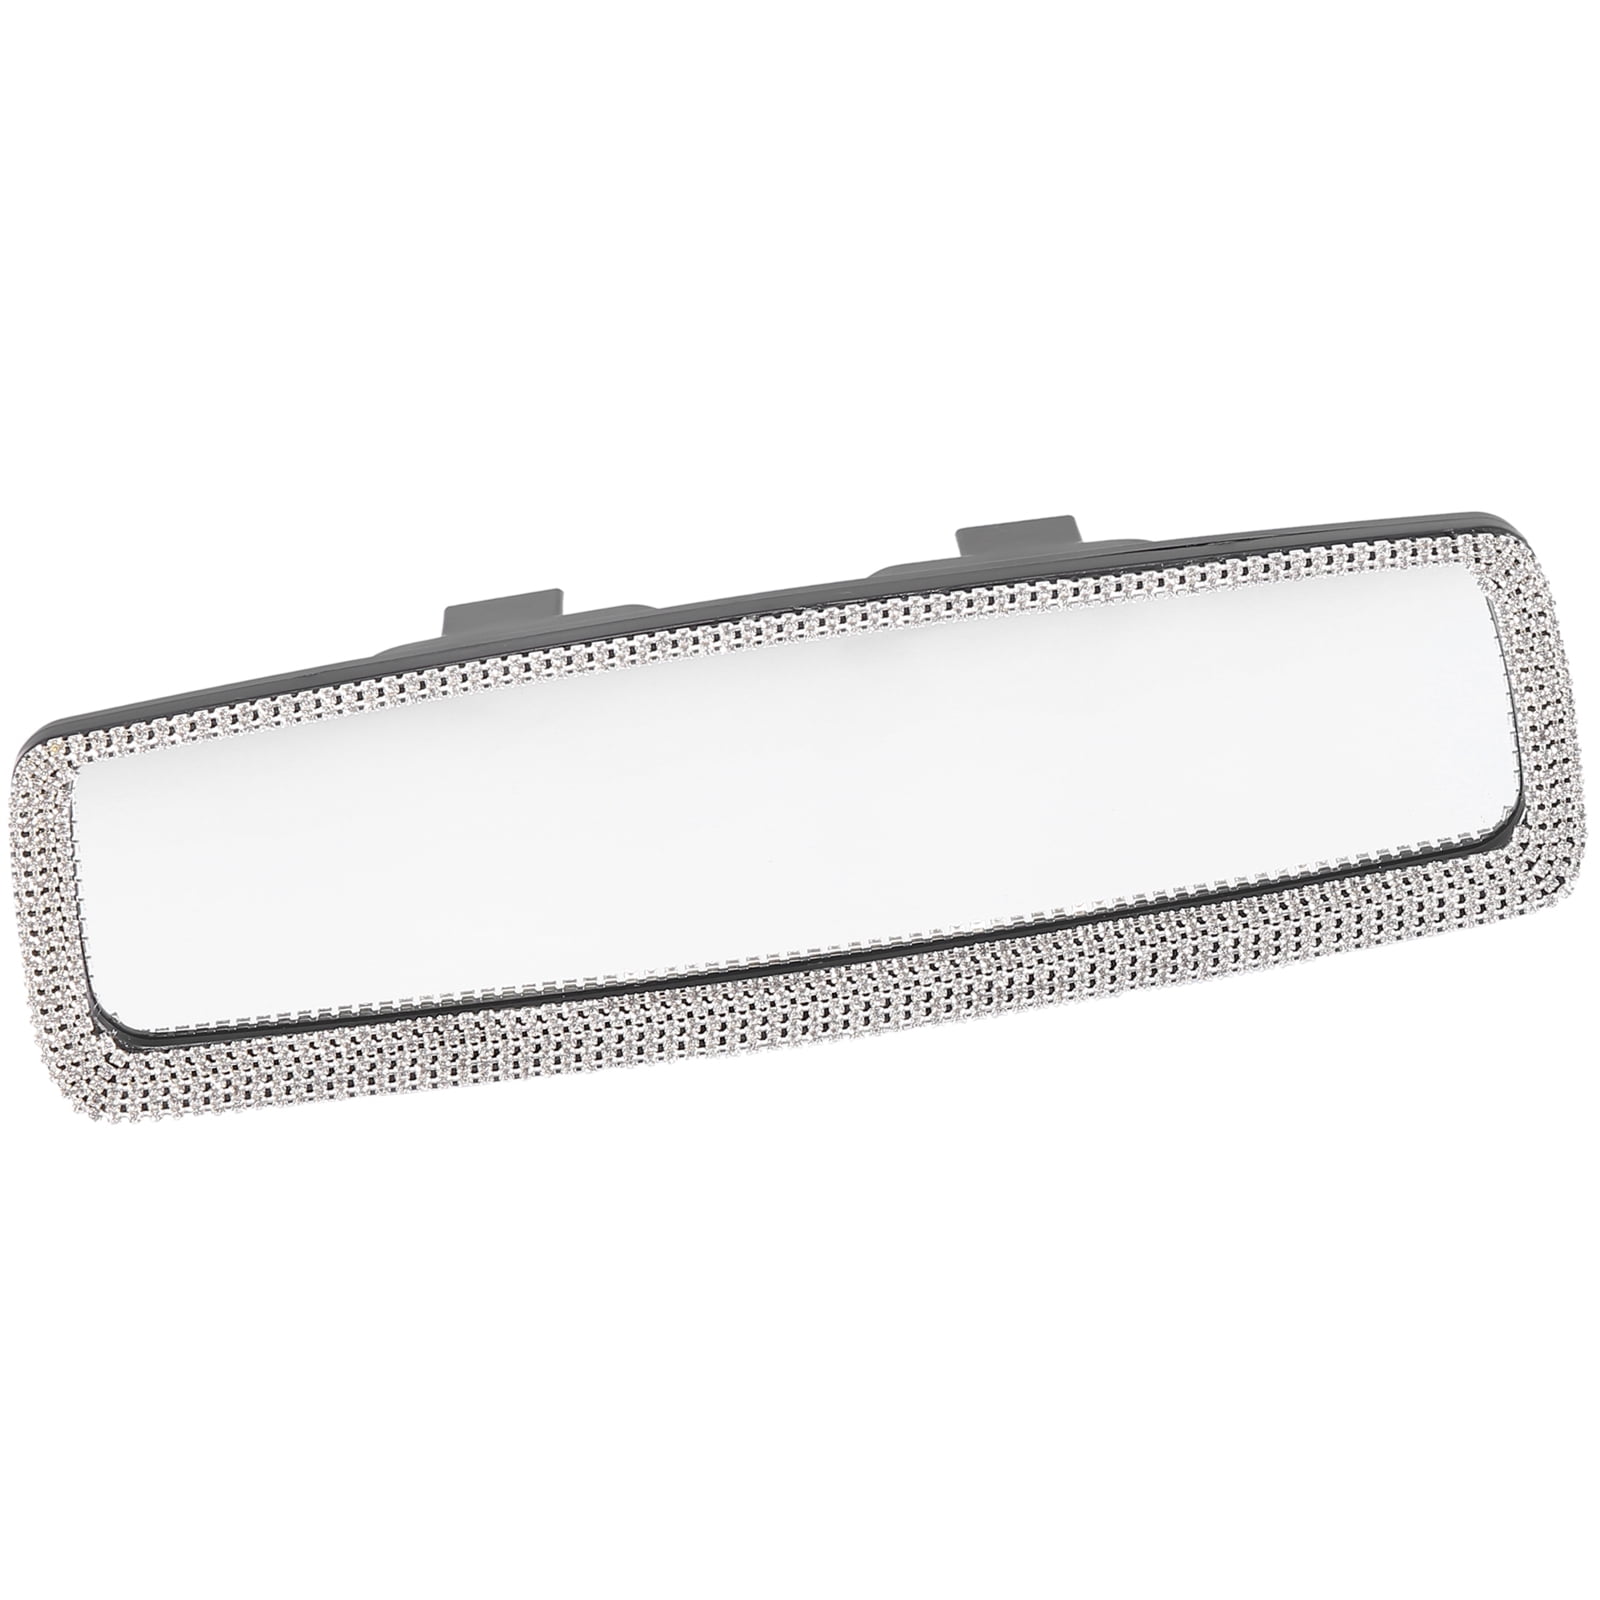 NEW CrystaI Ice Out Interior Rear View Mirror Cover Frame Bling Mercedes Benz 